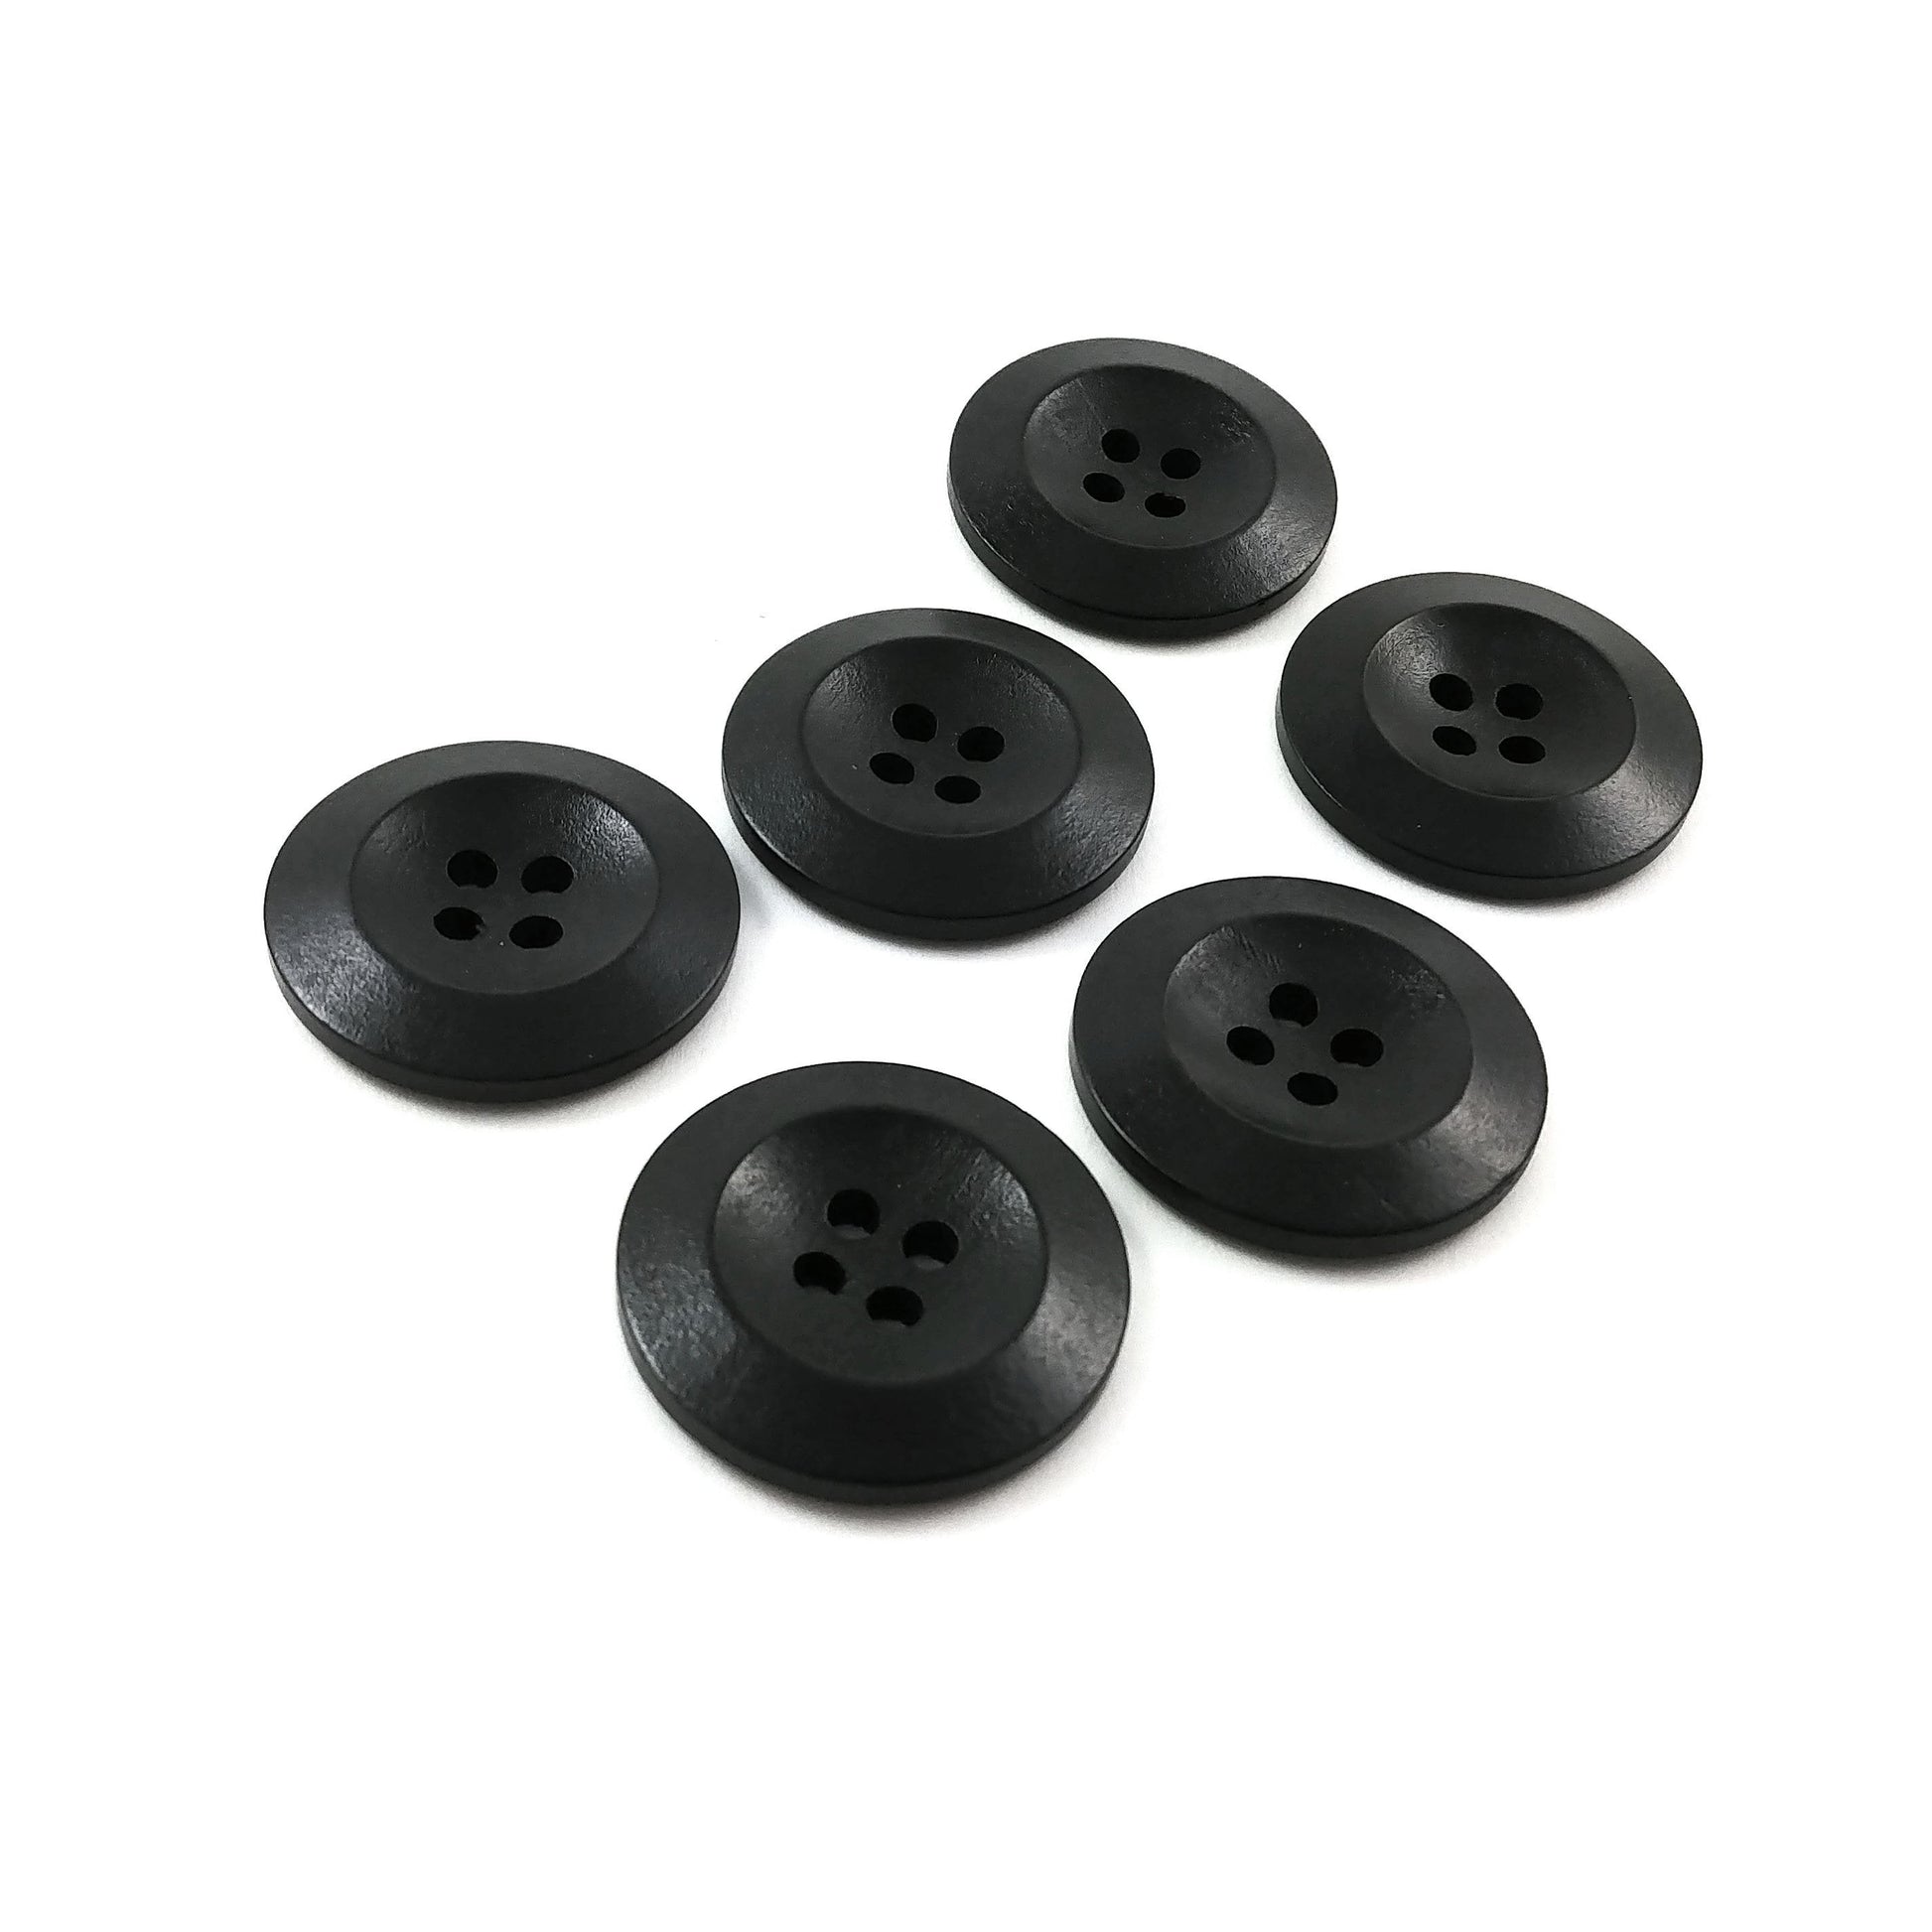 Wooden Sewing Buttons 28mm - set of 6 natural wood button - 6 colors available